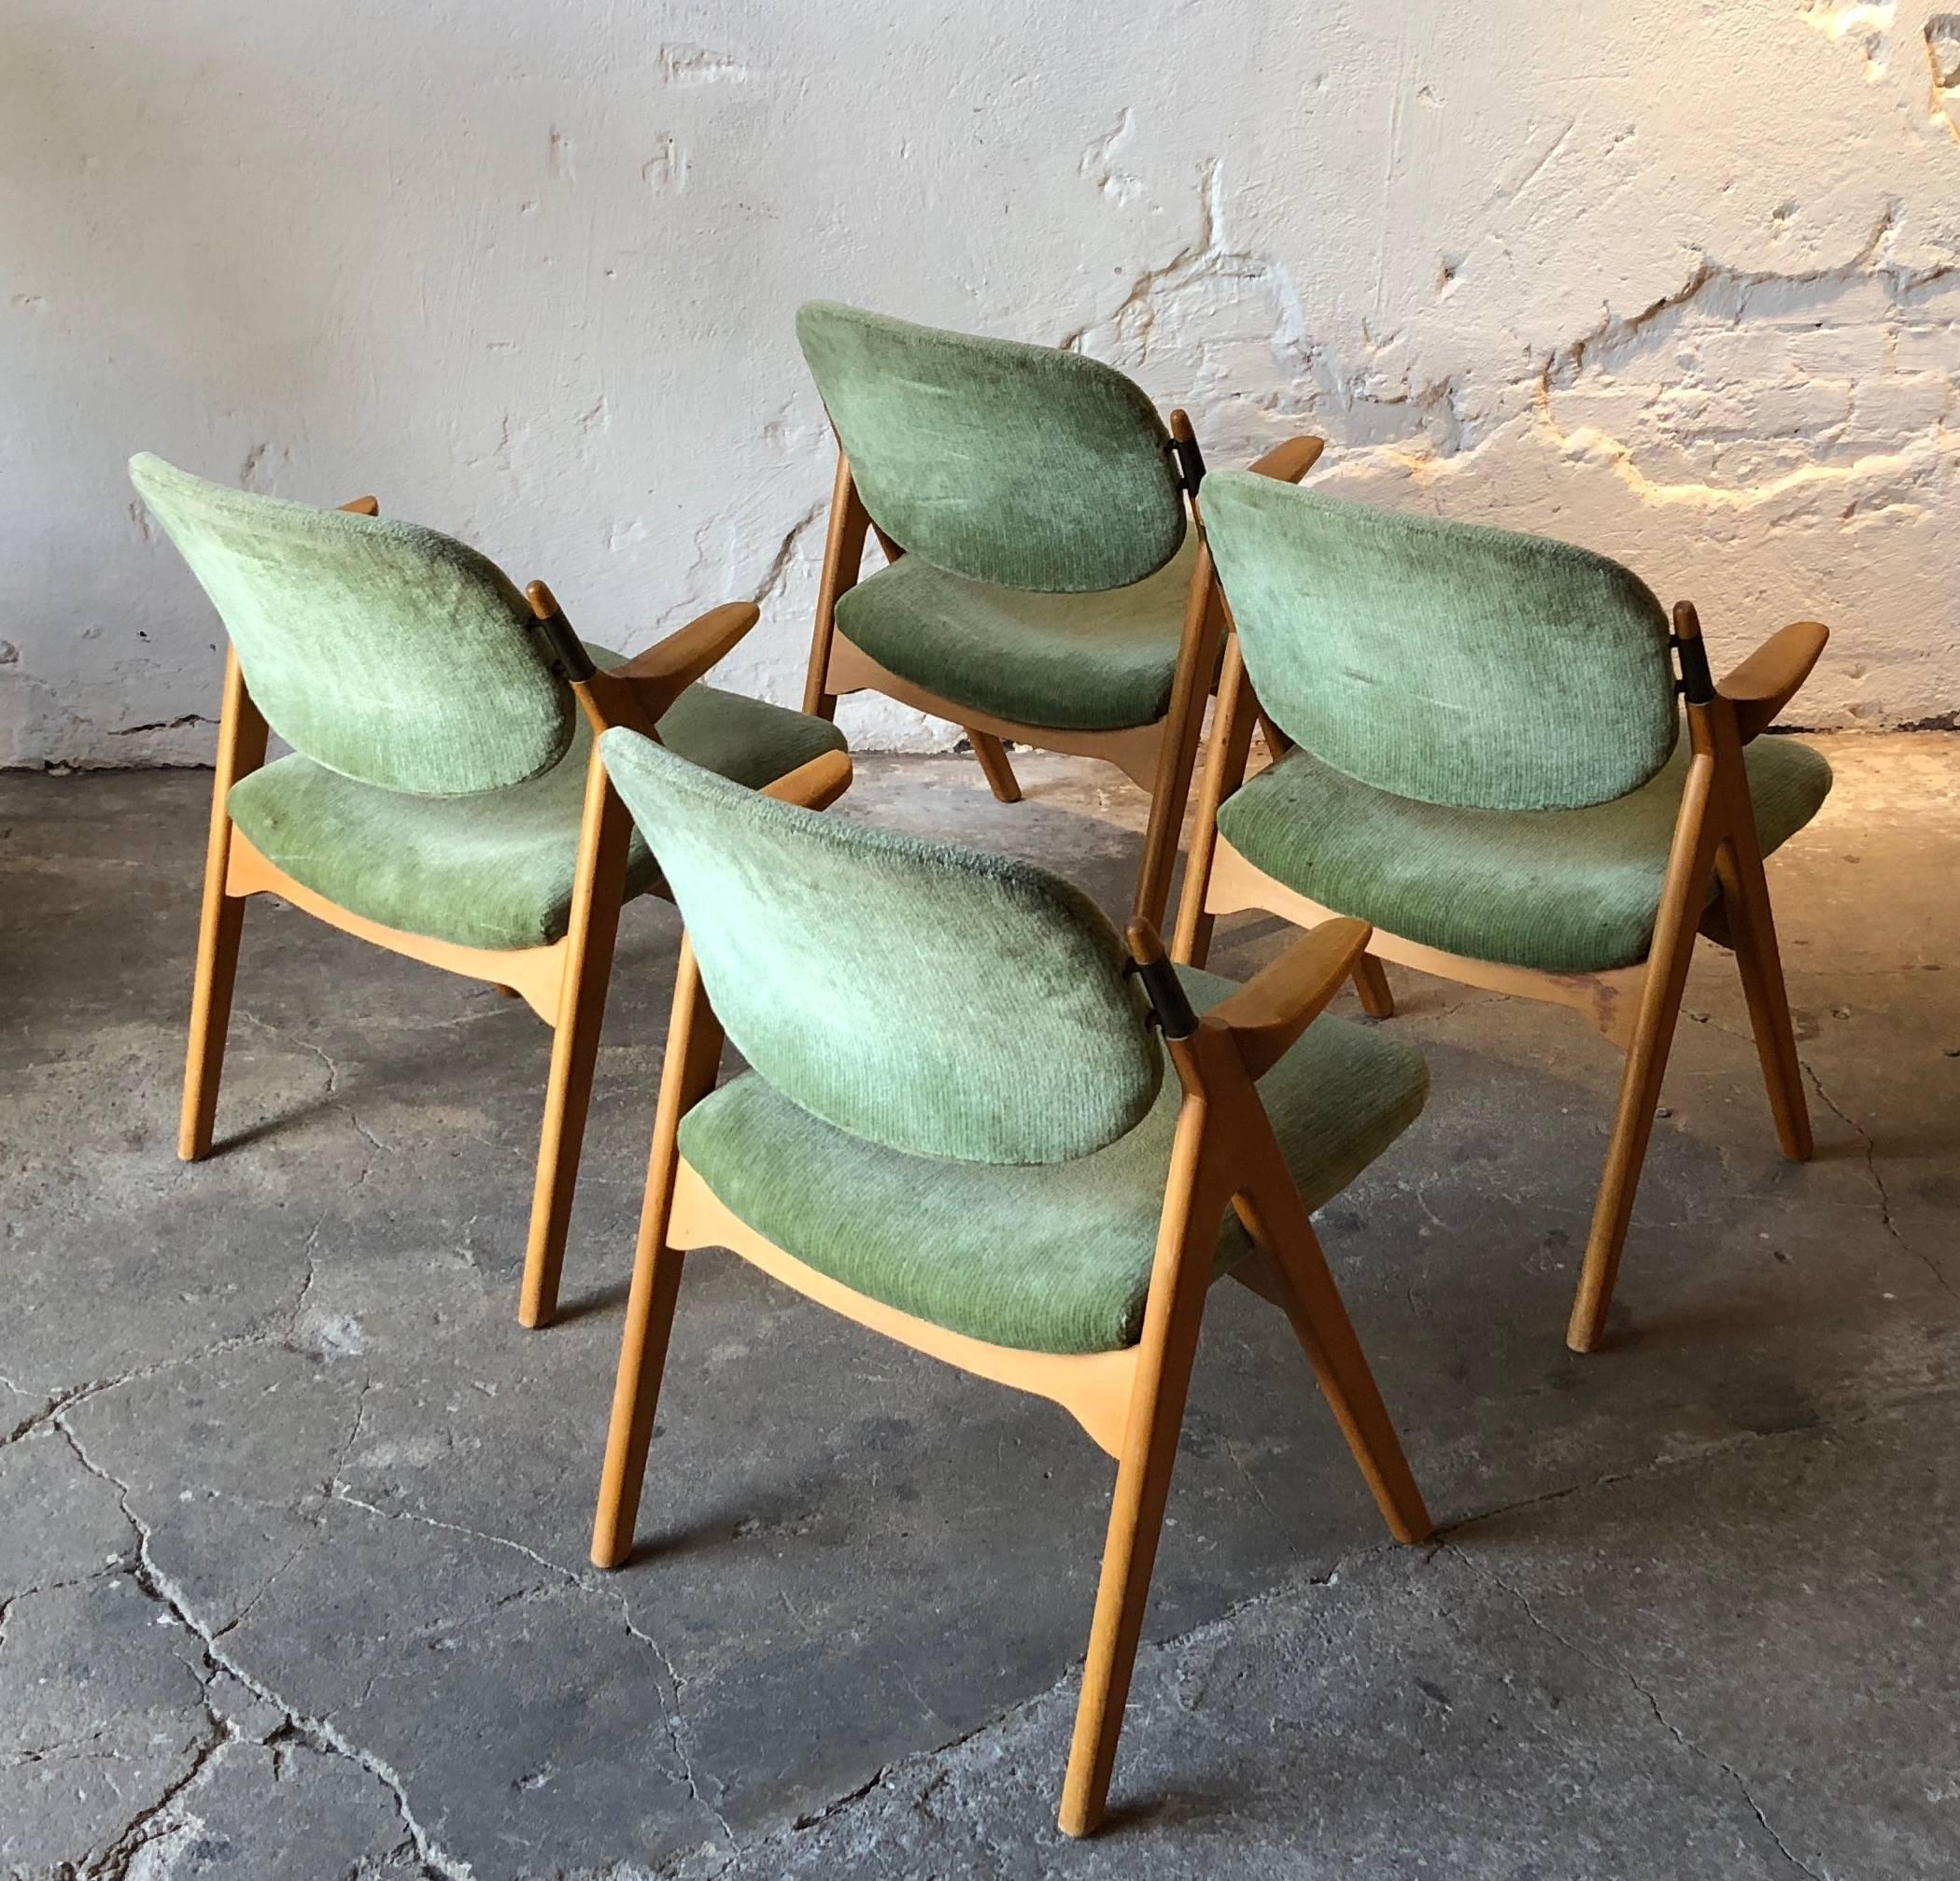 Mid-20th Century Scandinavian Modern Armchairs in Birch with Original Upholstery 1950s Vintage For Sale